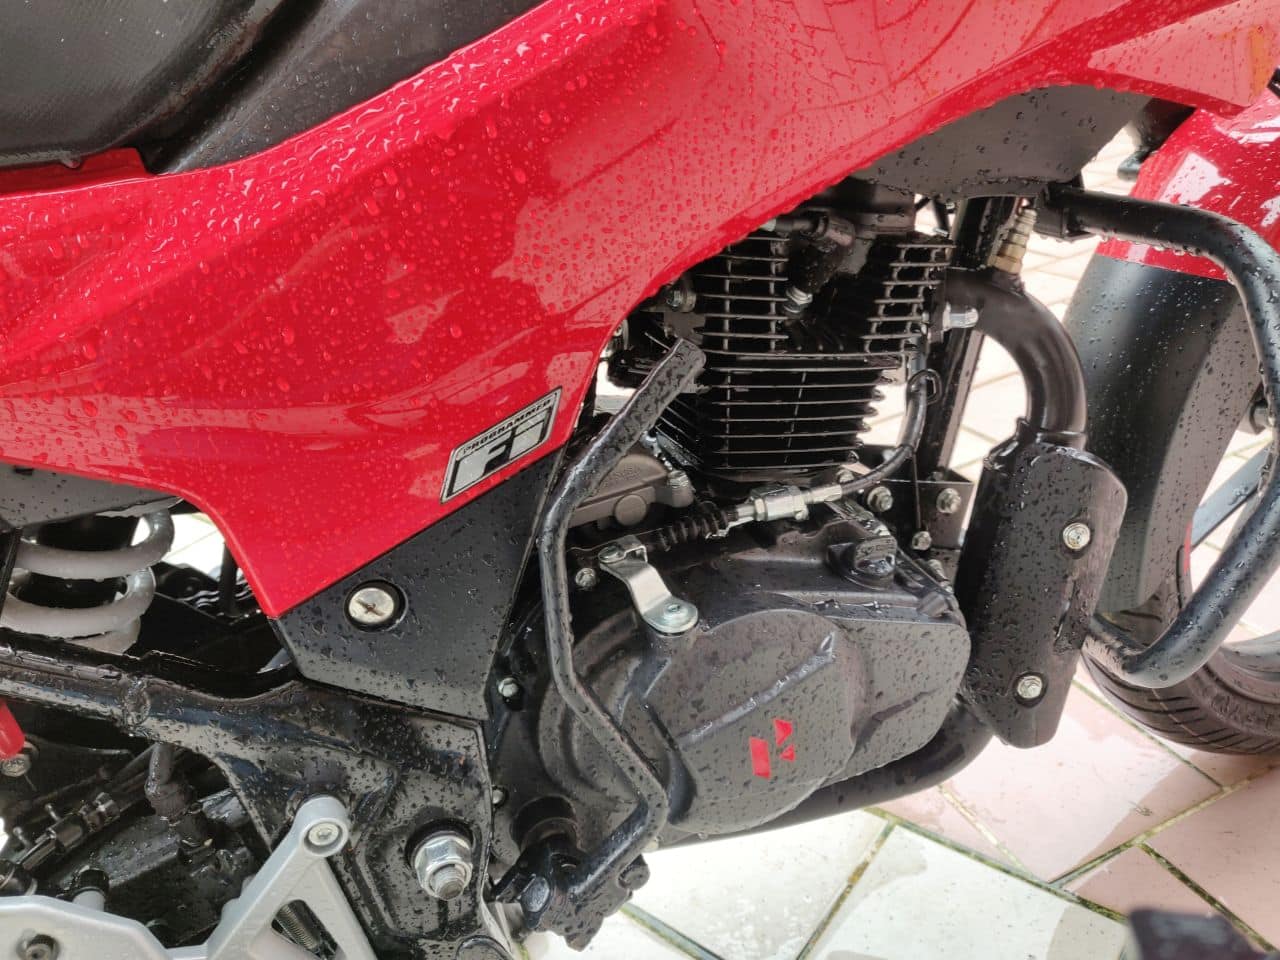 In Pics Hero Xtreme 160r Prices Specs And Everything Else You Need To Know